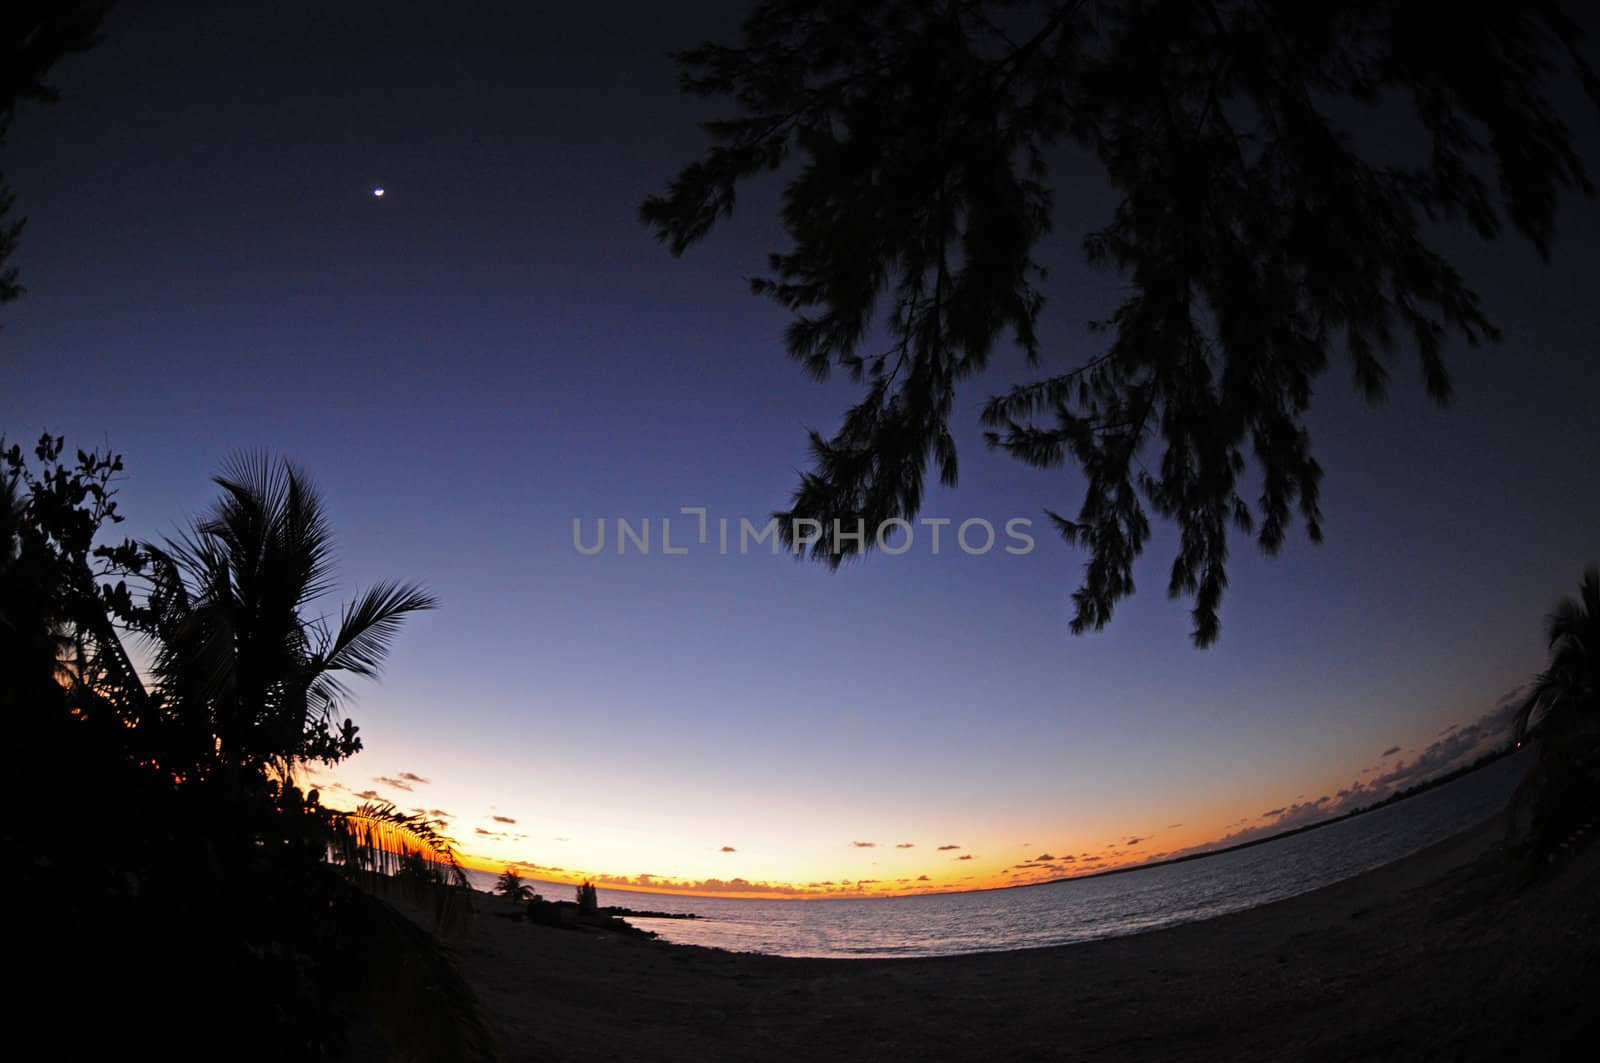 Scenic beach destination at night by ftlaudgirl